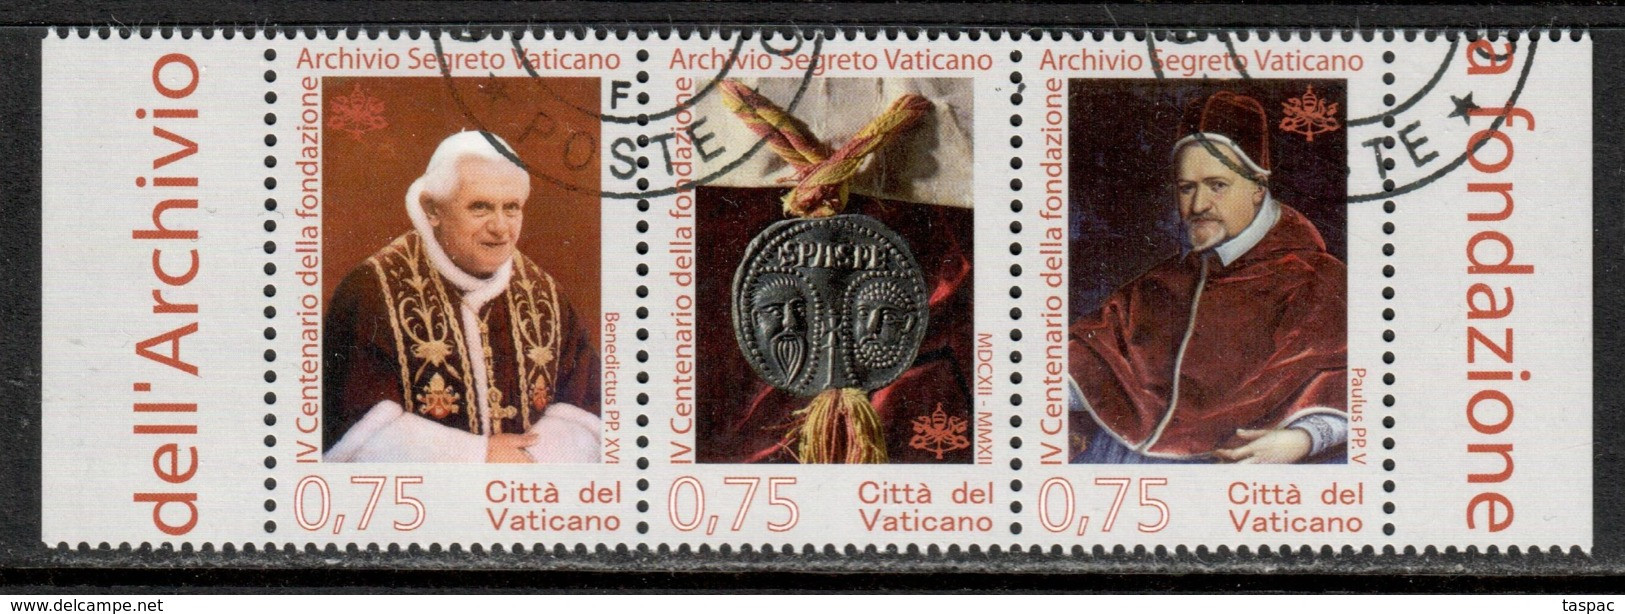 Vatican 2012 Mi# 1745-1747 Used - Strip Of 3 - 4th Centenary Of The Vatican Secret Archives - Used Stamps